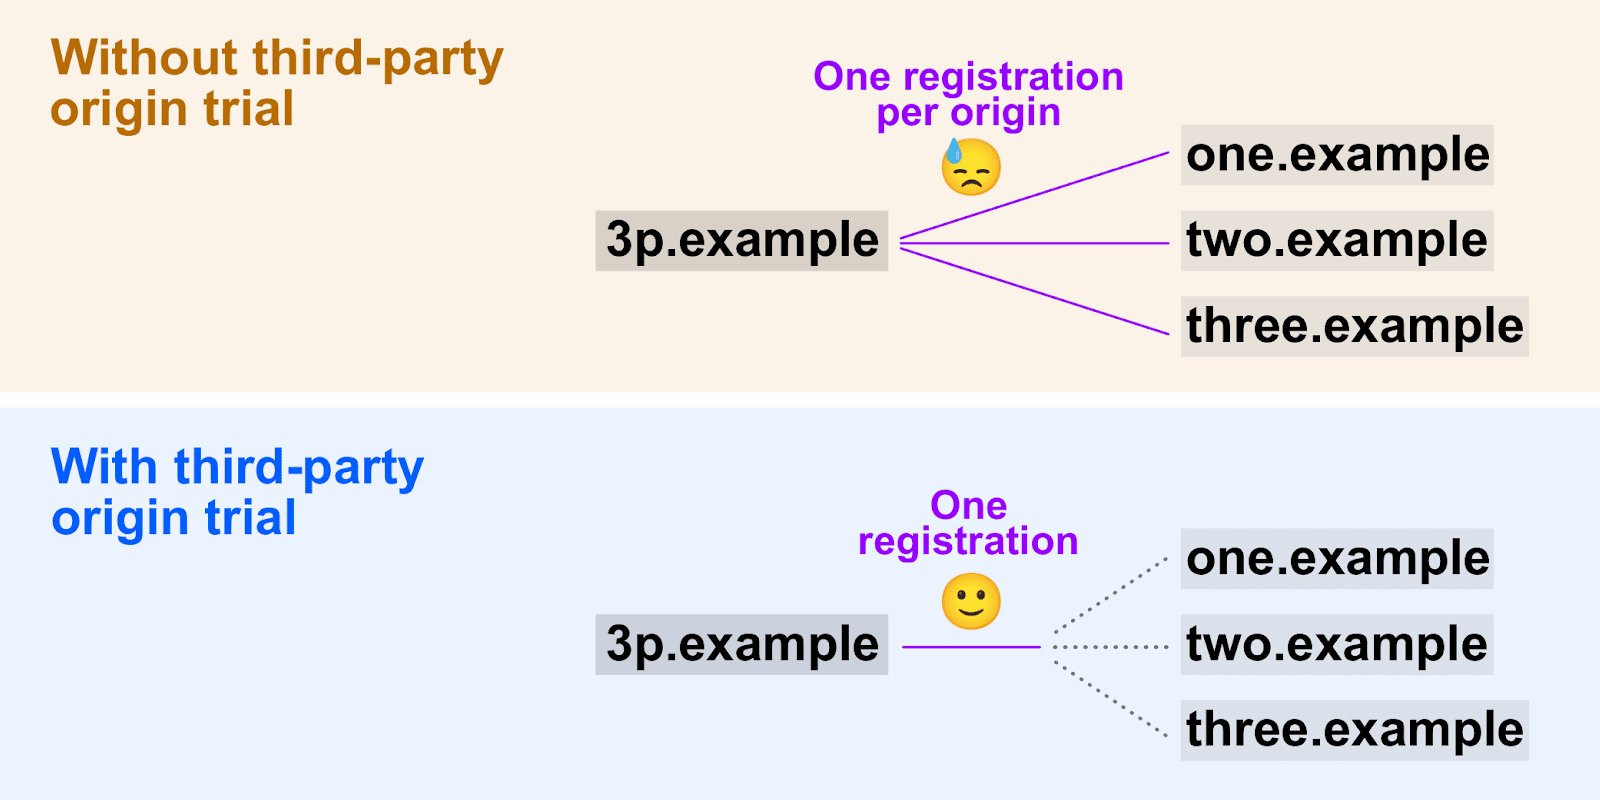 Diagram showing how
   third-party origin trials enable a single registration token to be used across multiple origins.